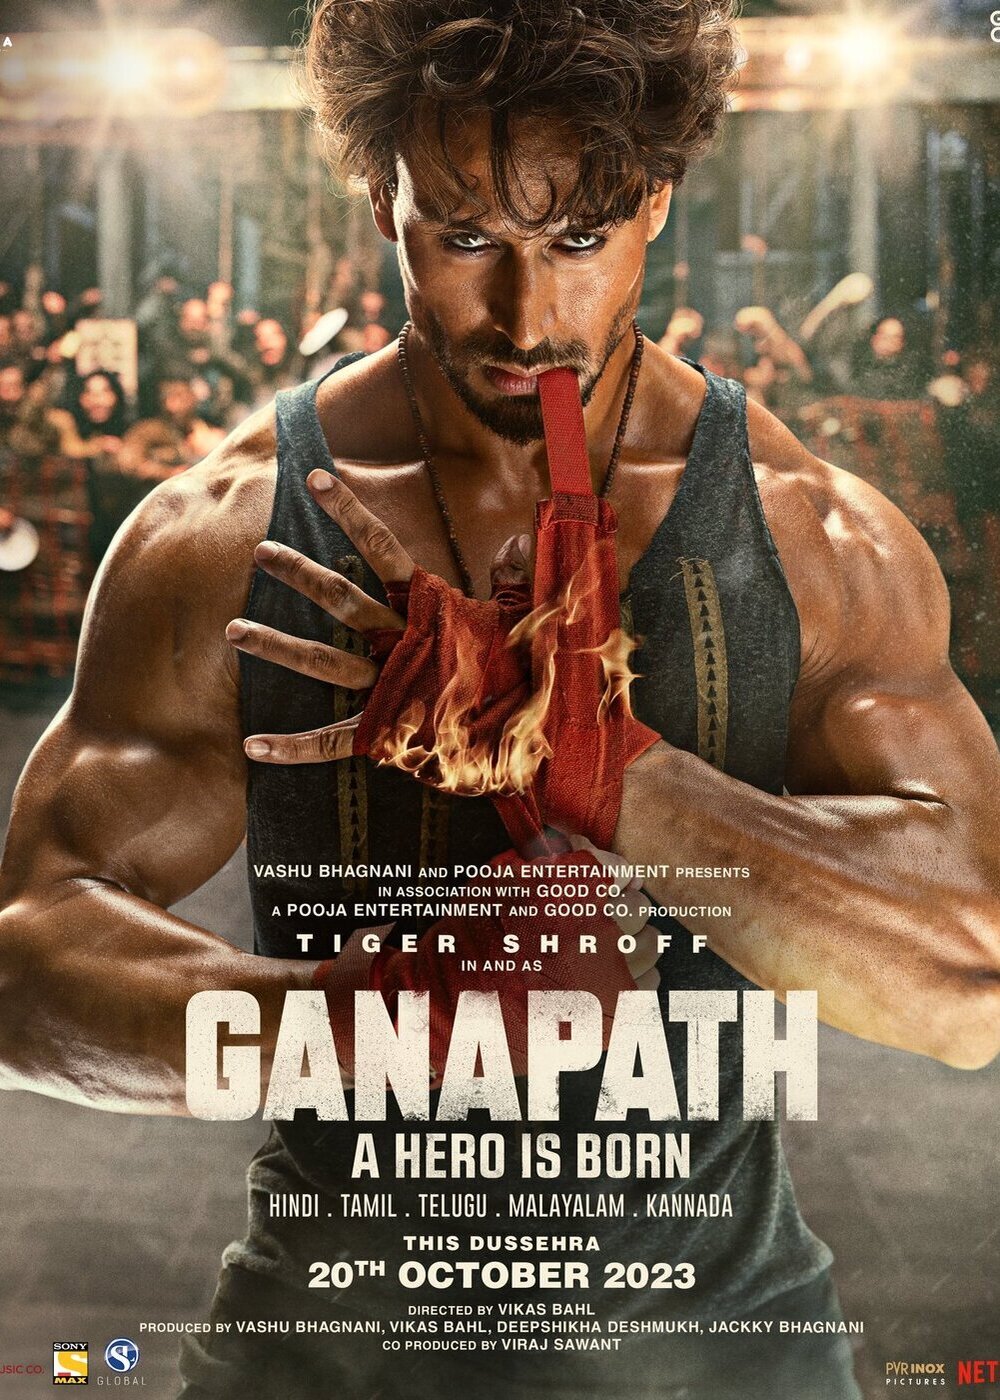 Ganapath Movie (2023) Release Date, Review, Cast, Trailer Gadgets 360